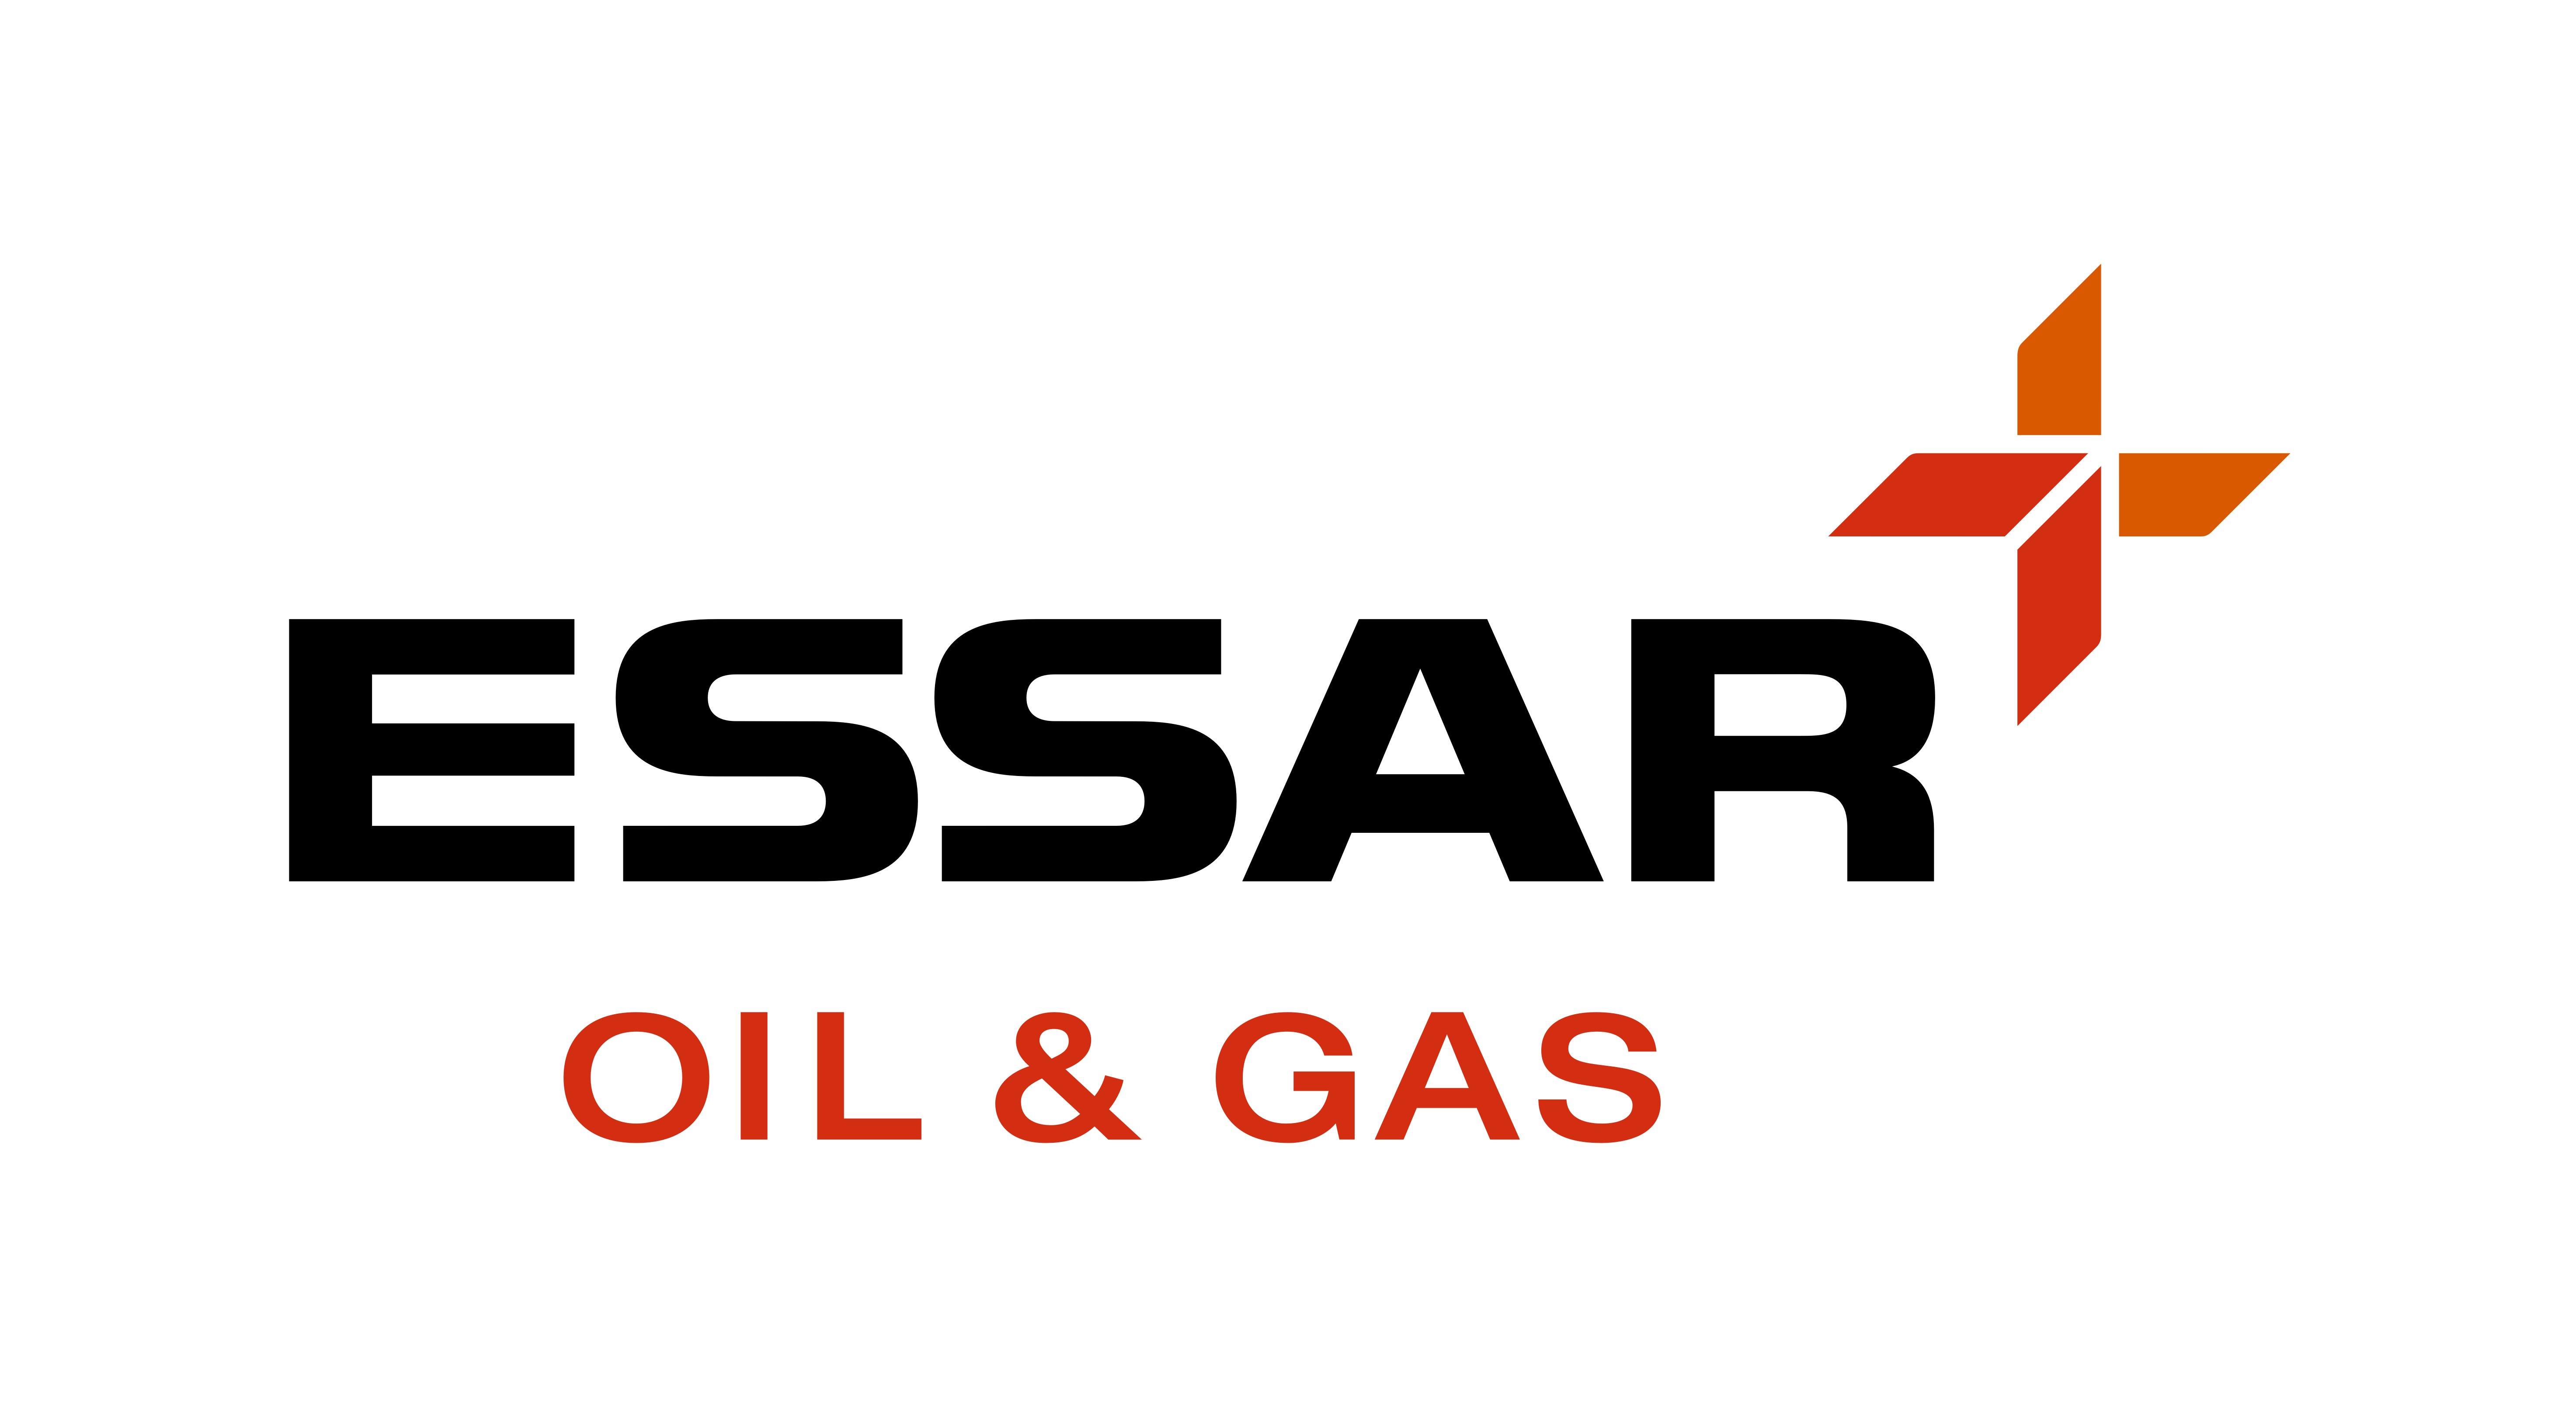  Essar Oil's fuel exports to fall in 2018/19 as focus shifts to local sales 